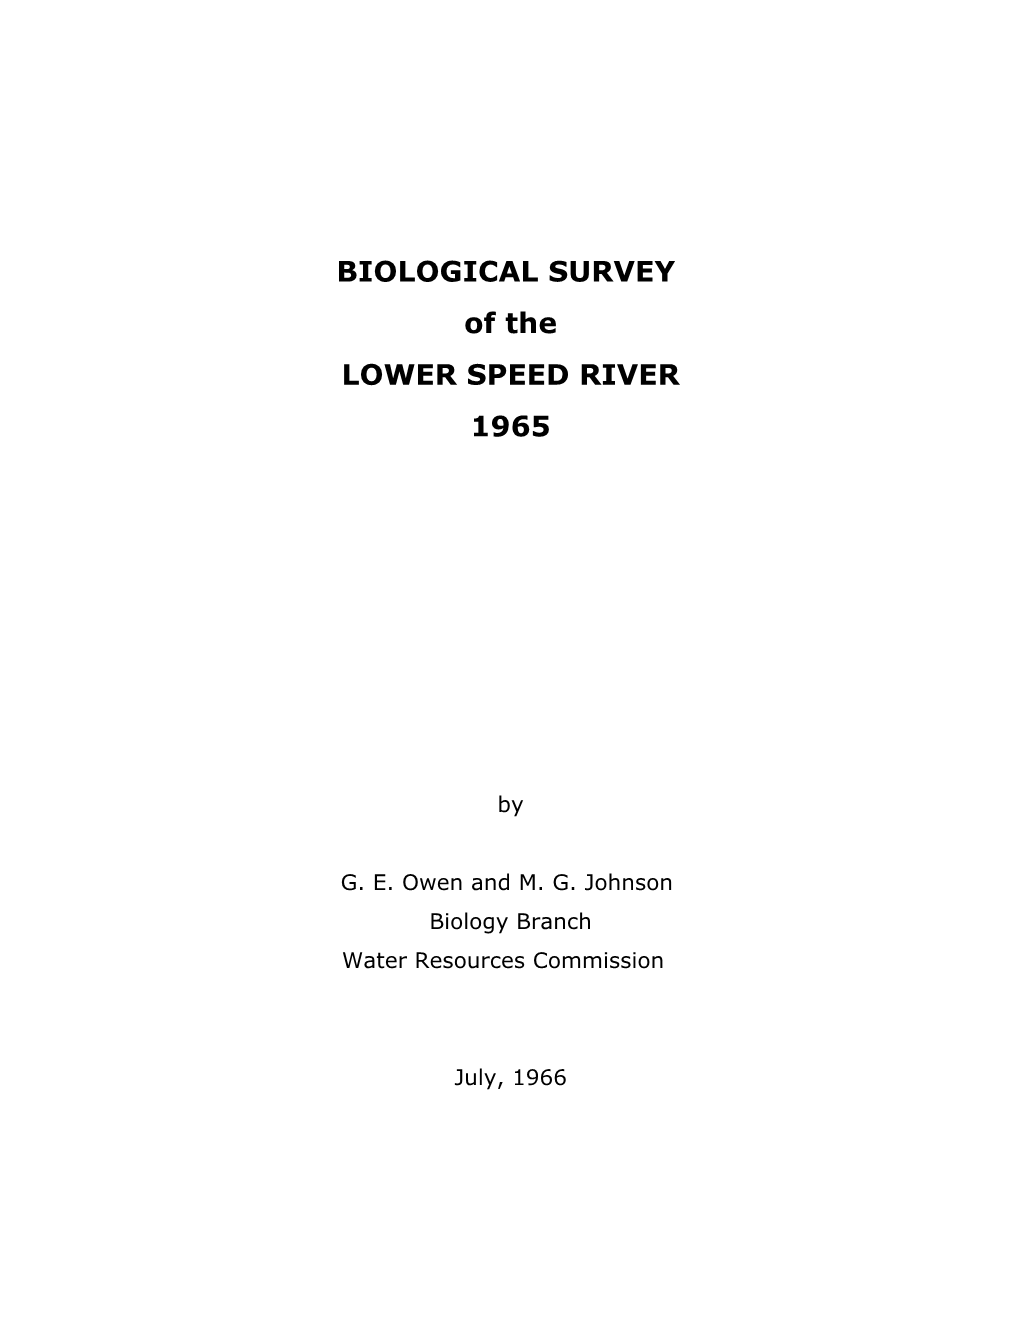 Biological Survey of the Lower Speed River, 1965